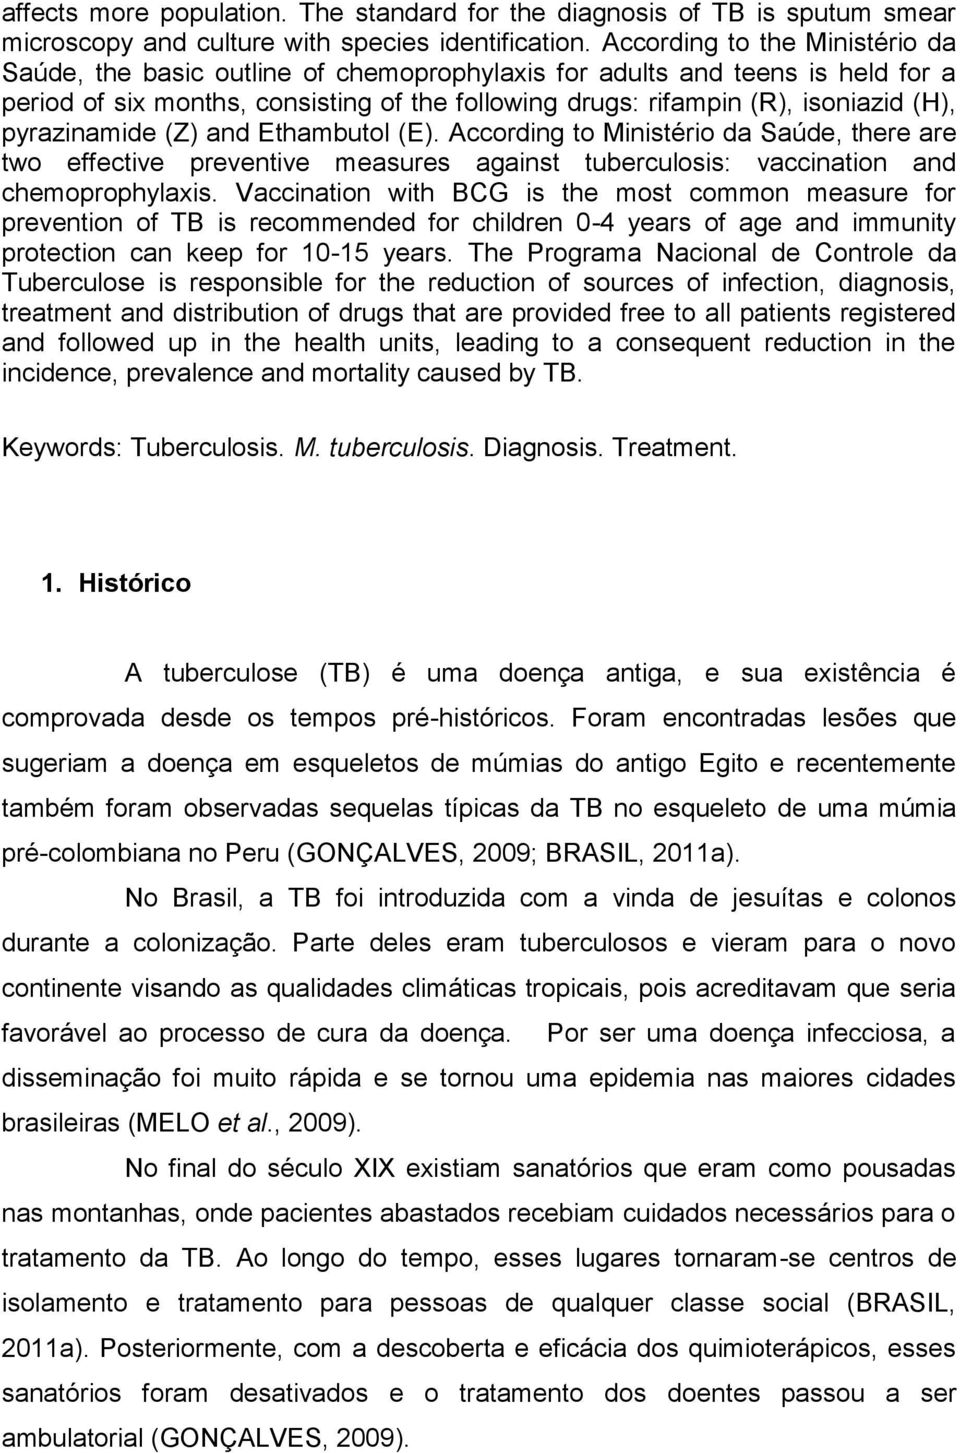 pyrazinamide (Z) and Ethambutol (E). According to Ministério da Saúde, there are two effective preventive measures against tuberculosis: vaccination and chemoprophylaxis.